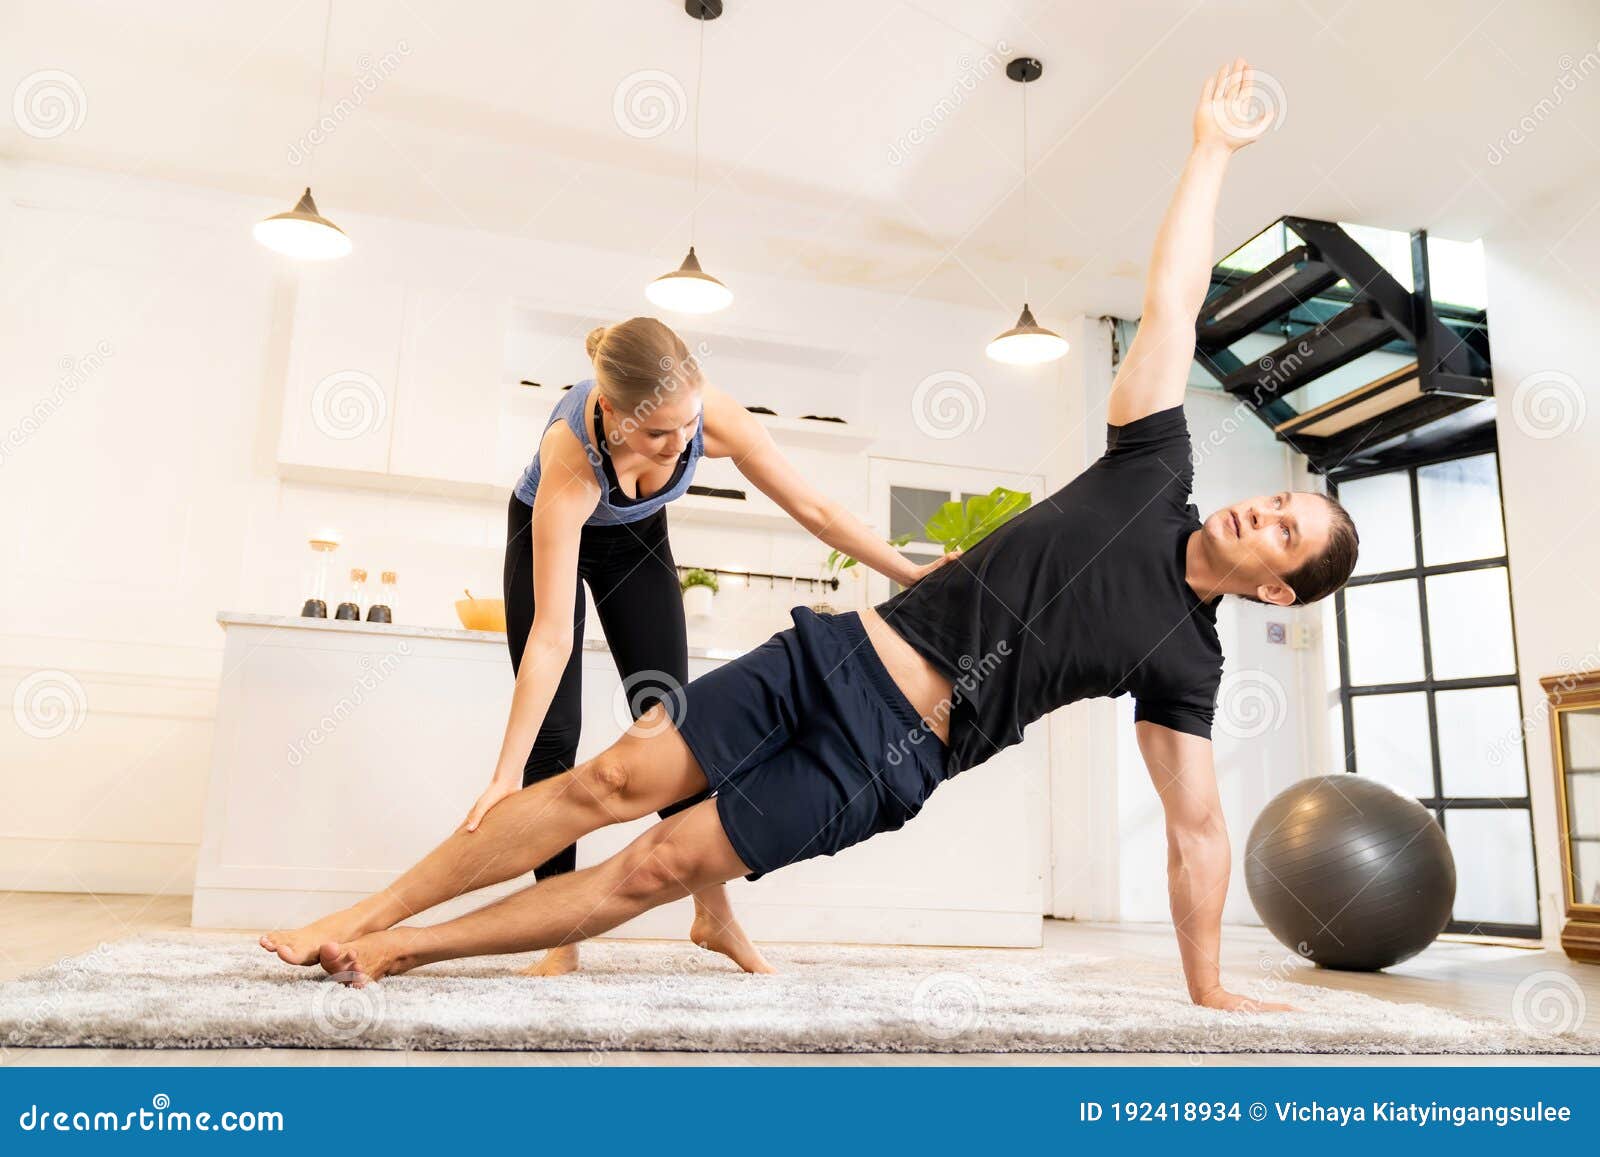 Yoga training at home stock photo. Image of show, delivery 192418934